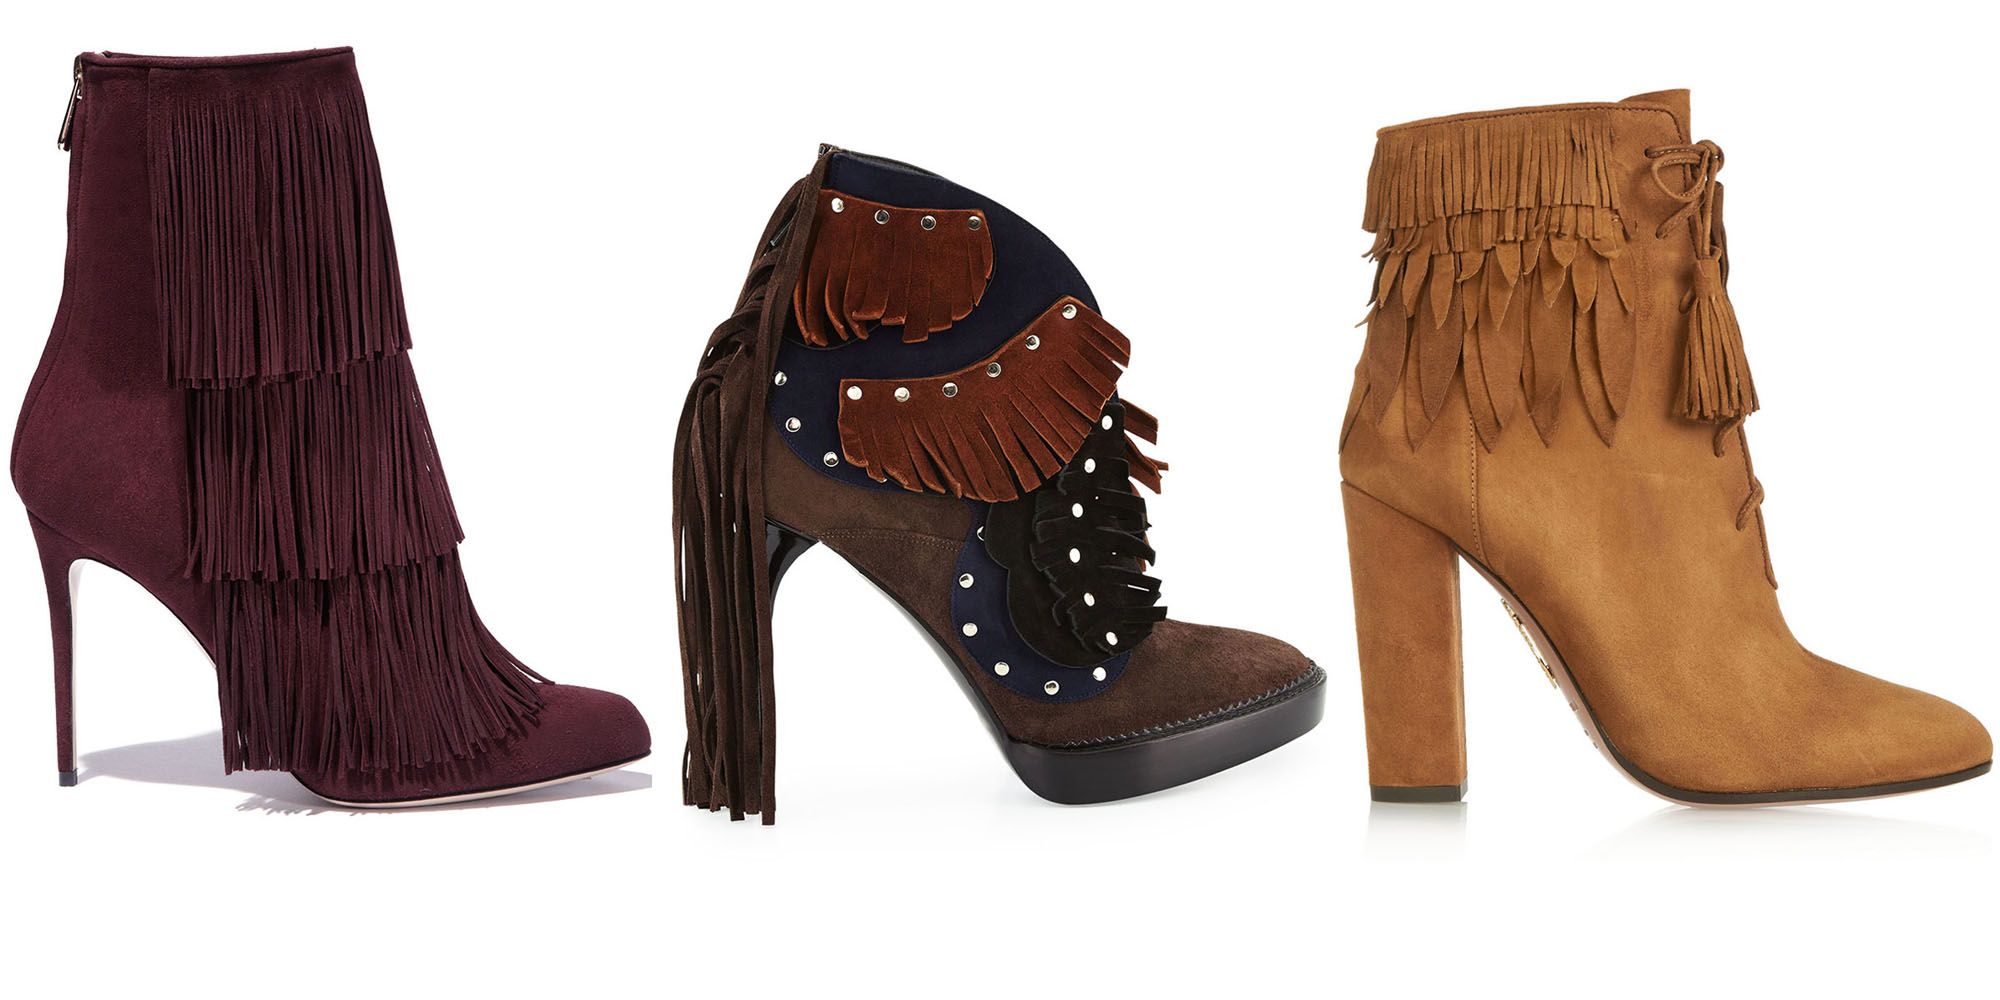 Fringe Boots and Booties for Fall - 20 